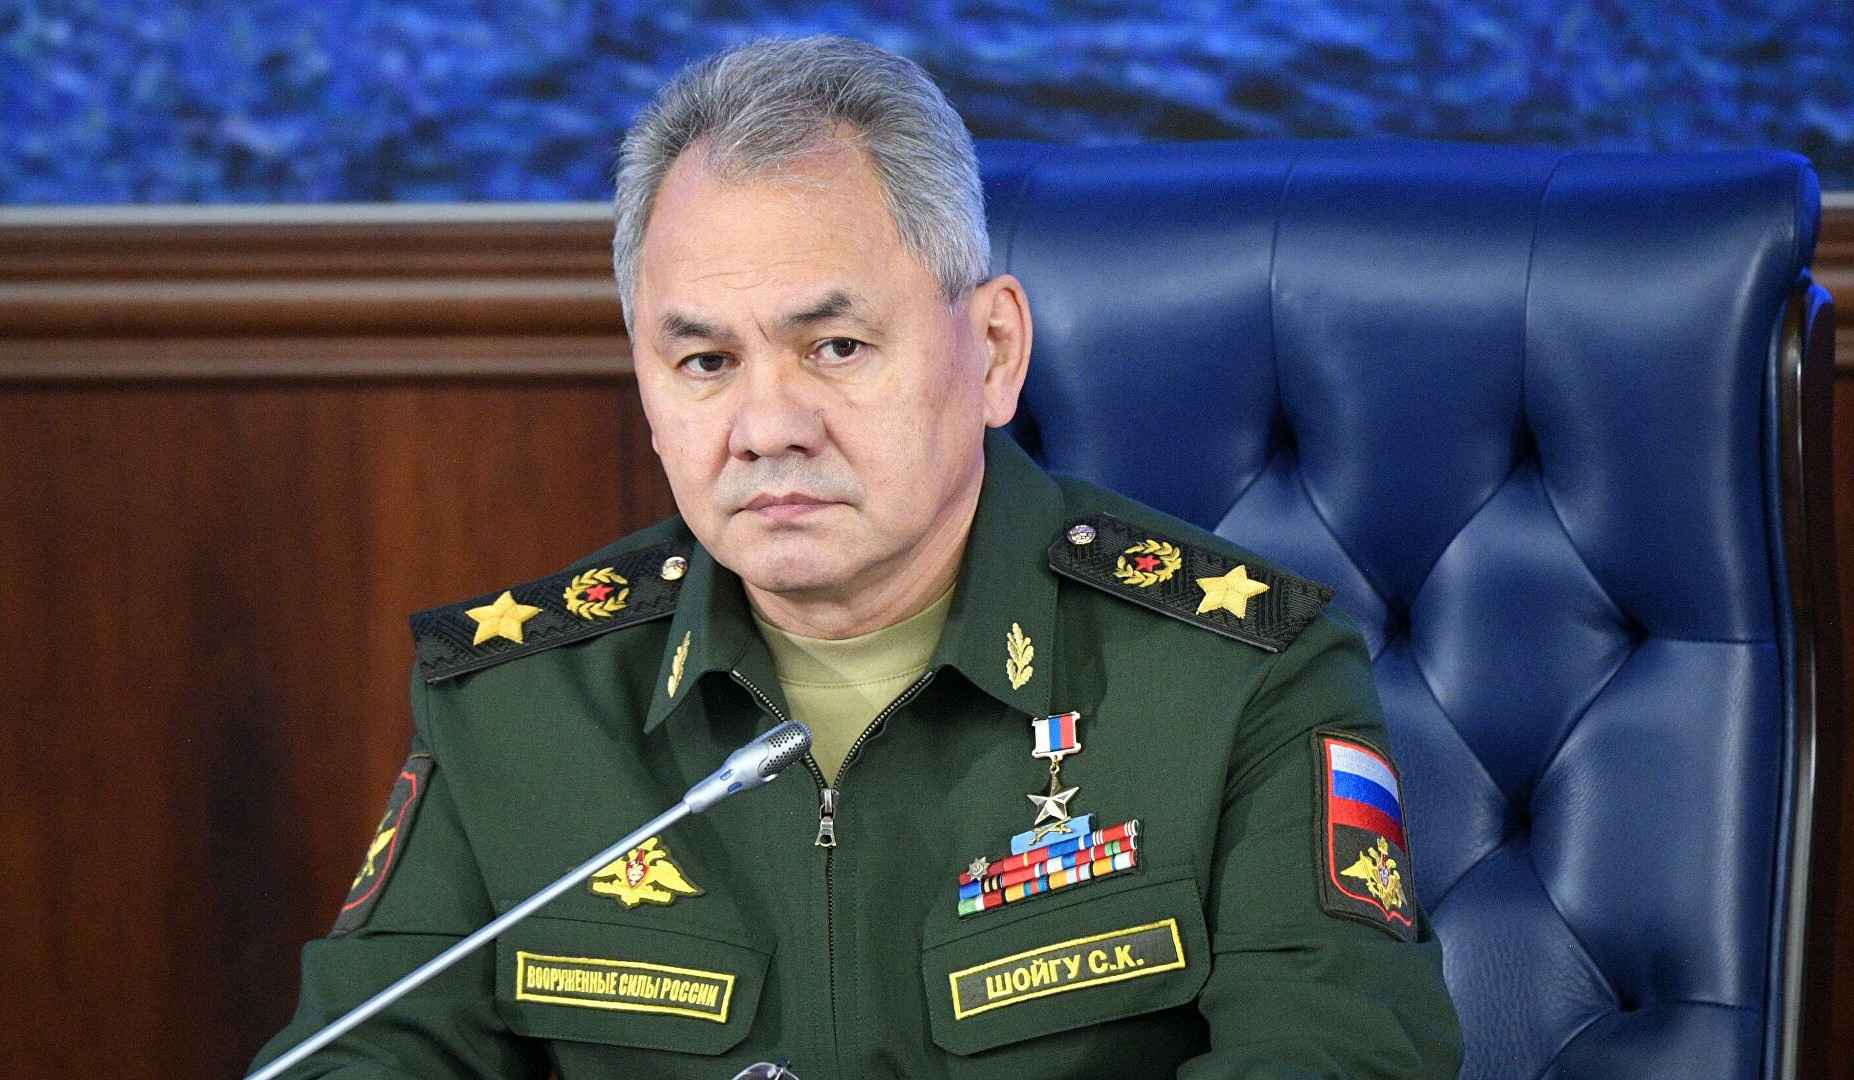 Russian troops continue to be main guarantor of peace in Syria and Karabakh: Shoigu